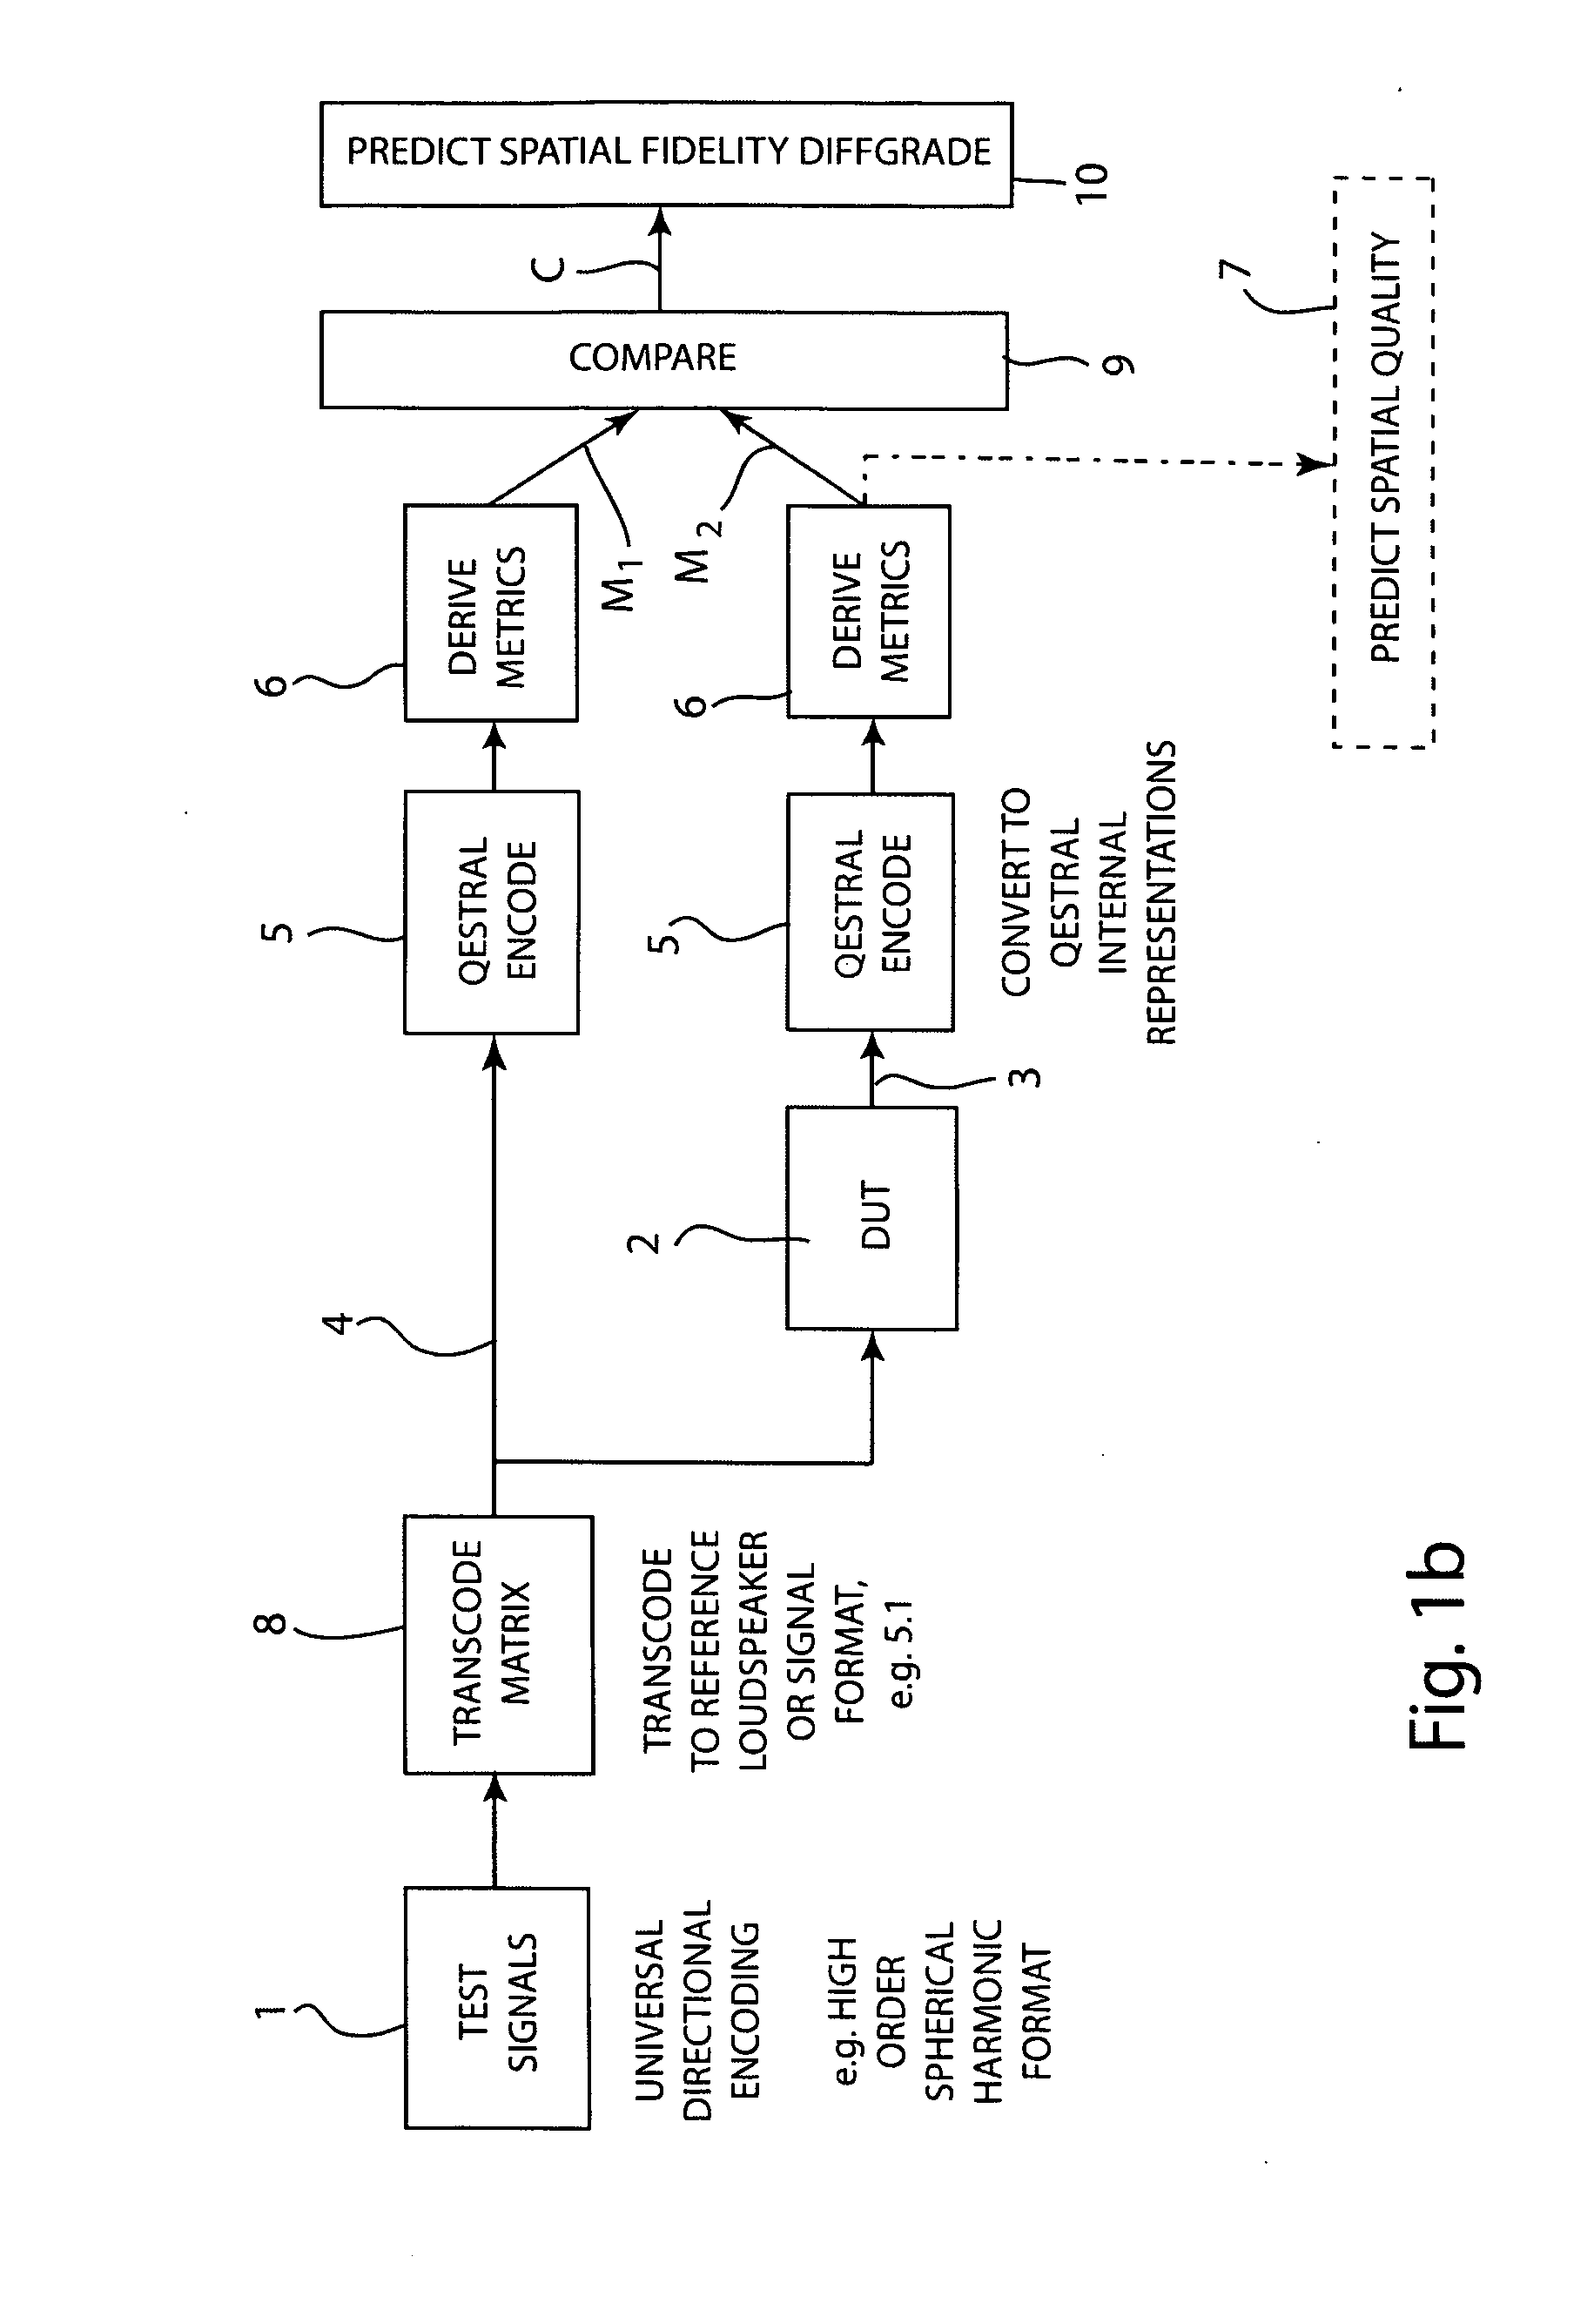 System, devices and methods for predicting the perceived spatial quality of sound processing and reproducing equipment